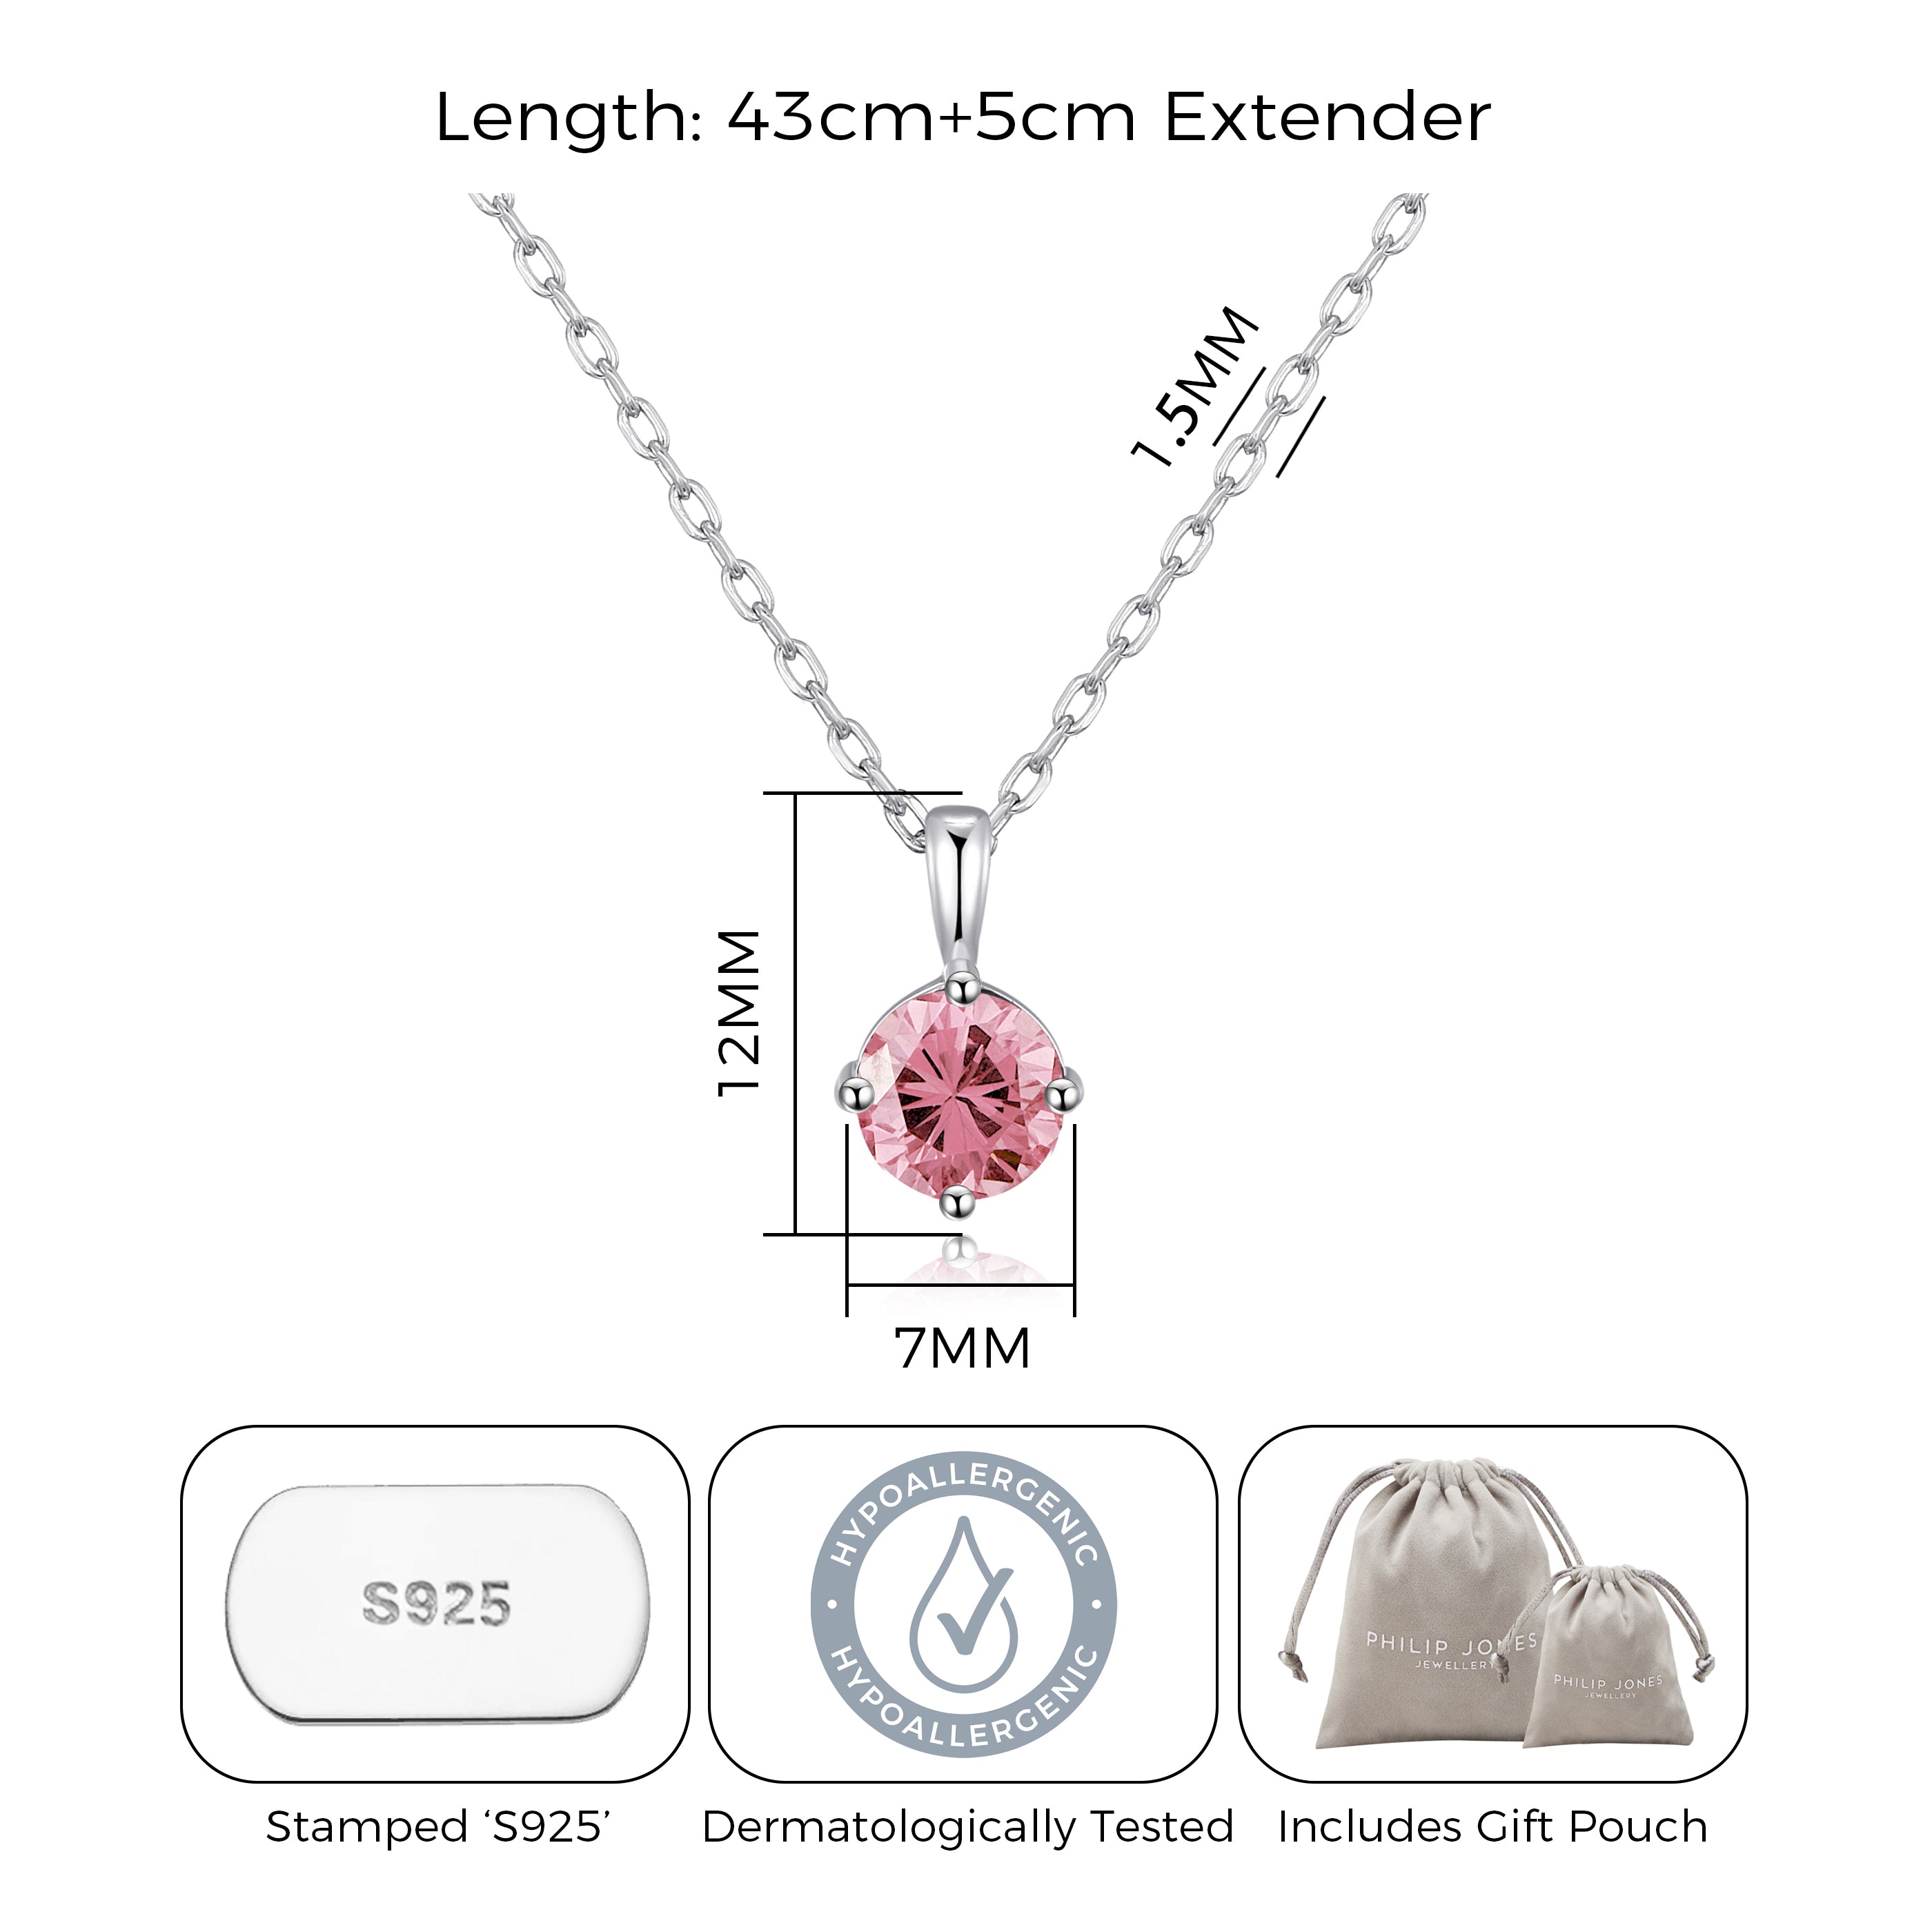 Sterling Silver October (Tourmaline) Birthstone Necklace Created with Zircondia® Crystals